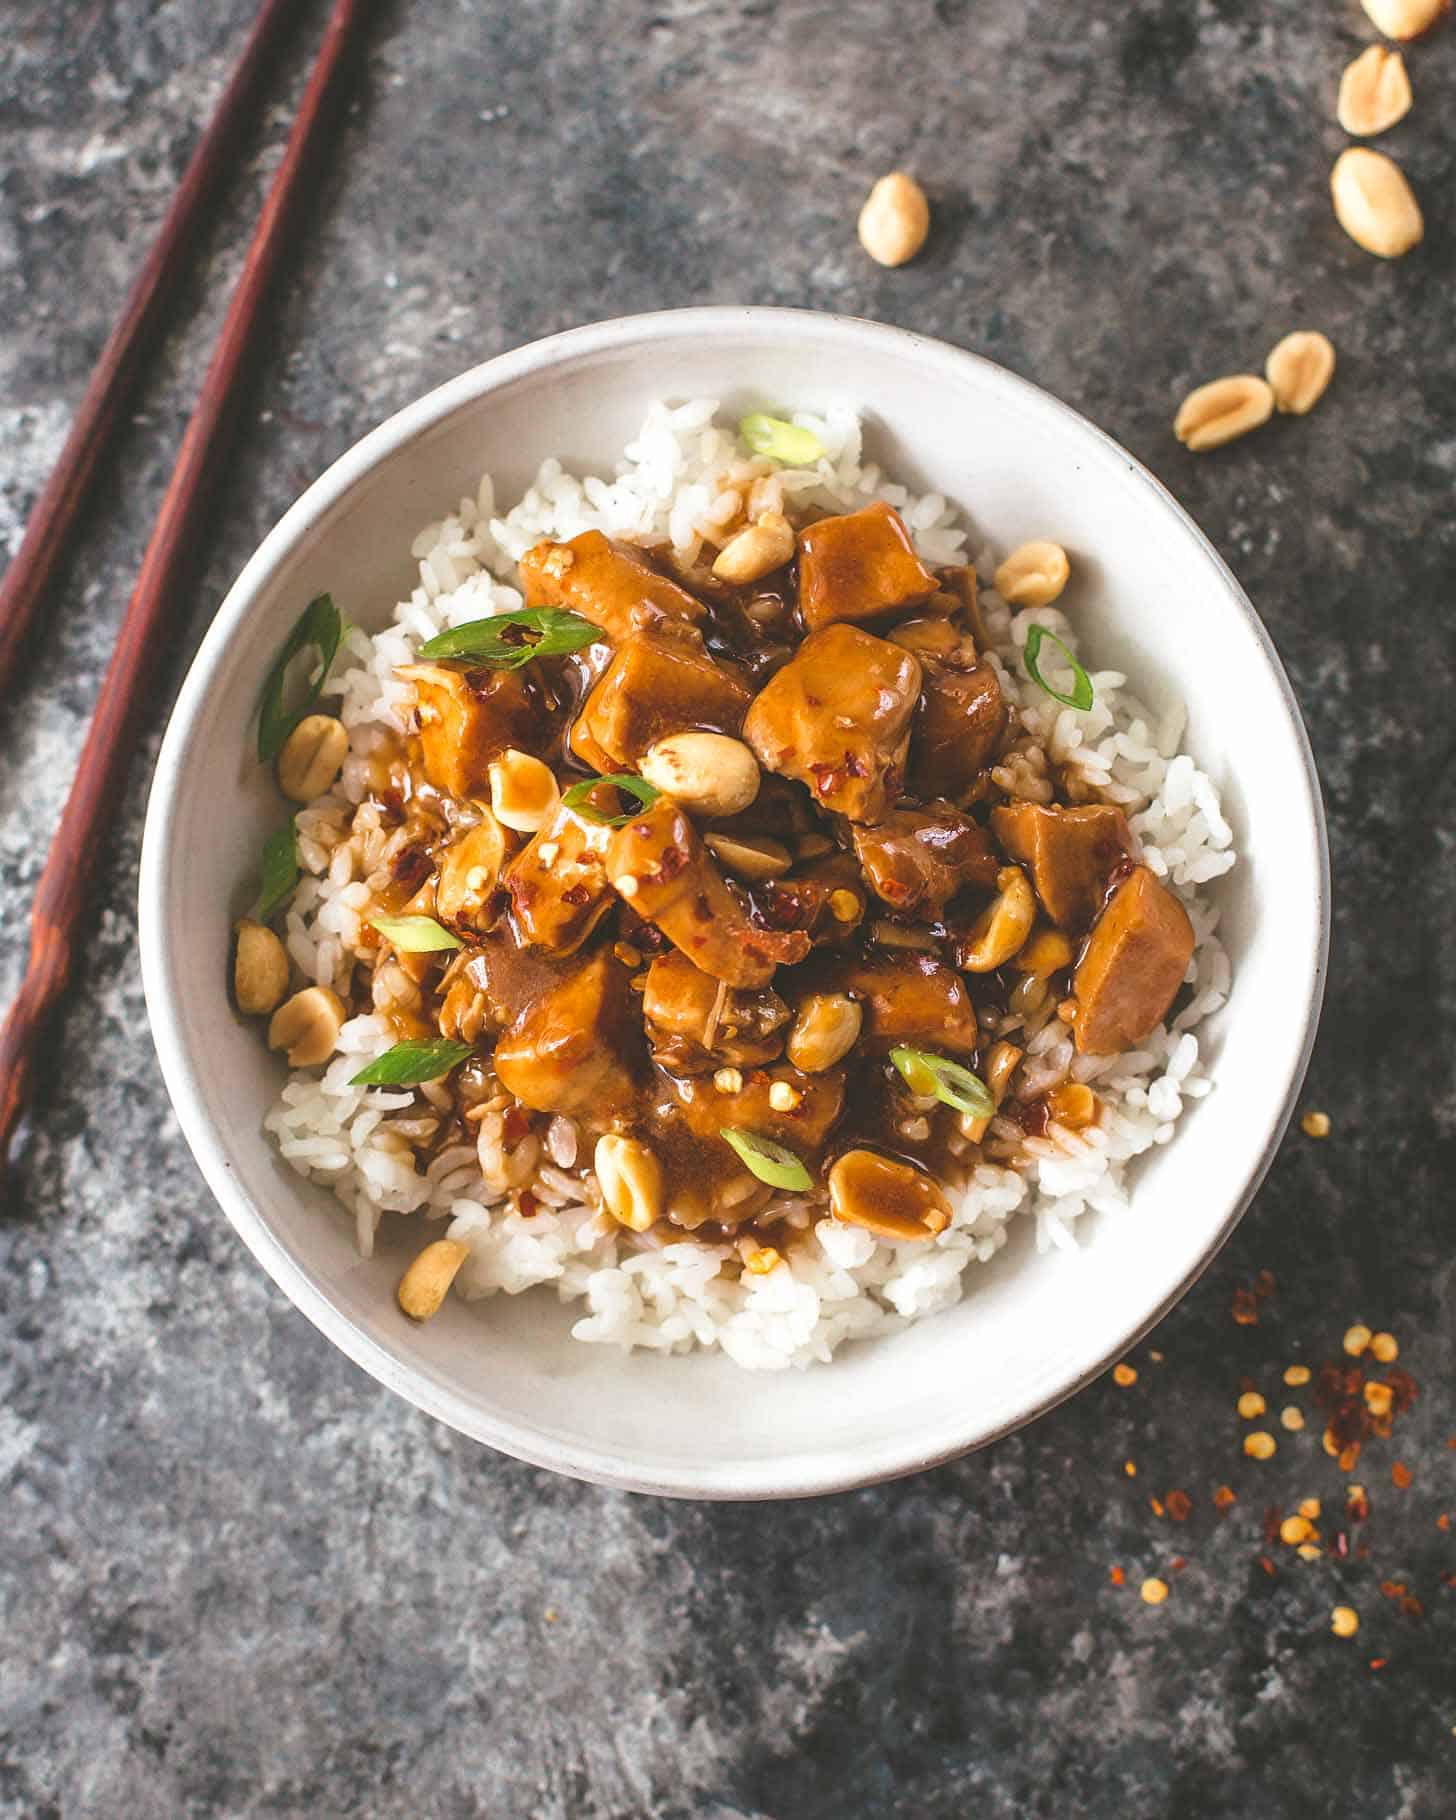 instant pot kung pao chicken